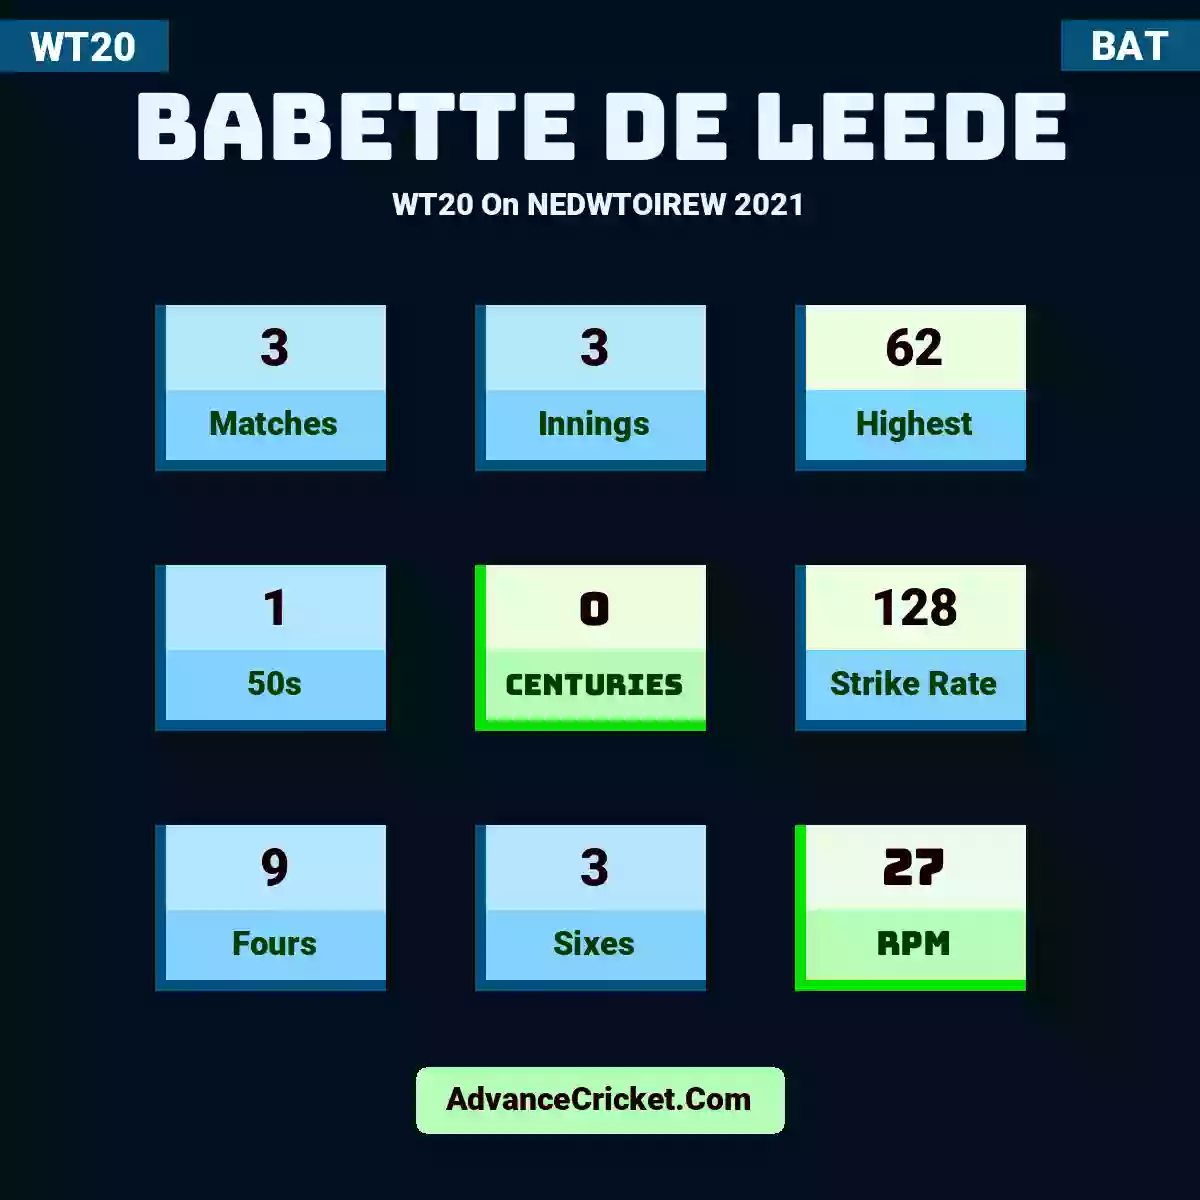 Babette de Leede WT20  On NEDWTOIREW 2021, Babette de Leede played 3 matches, scored 62 runs as highest, 1 half-centuries, and 0 centuries, with a strike rate of 128. B.Leede hit 9 fours and 3 sixes, with an RPM of 27.